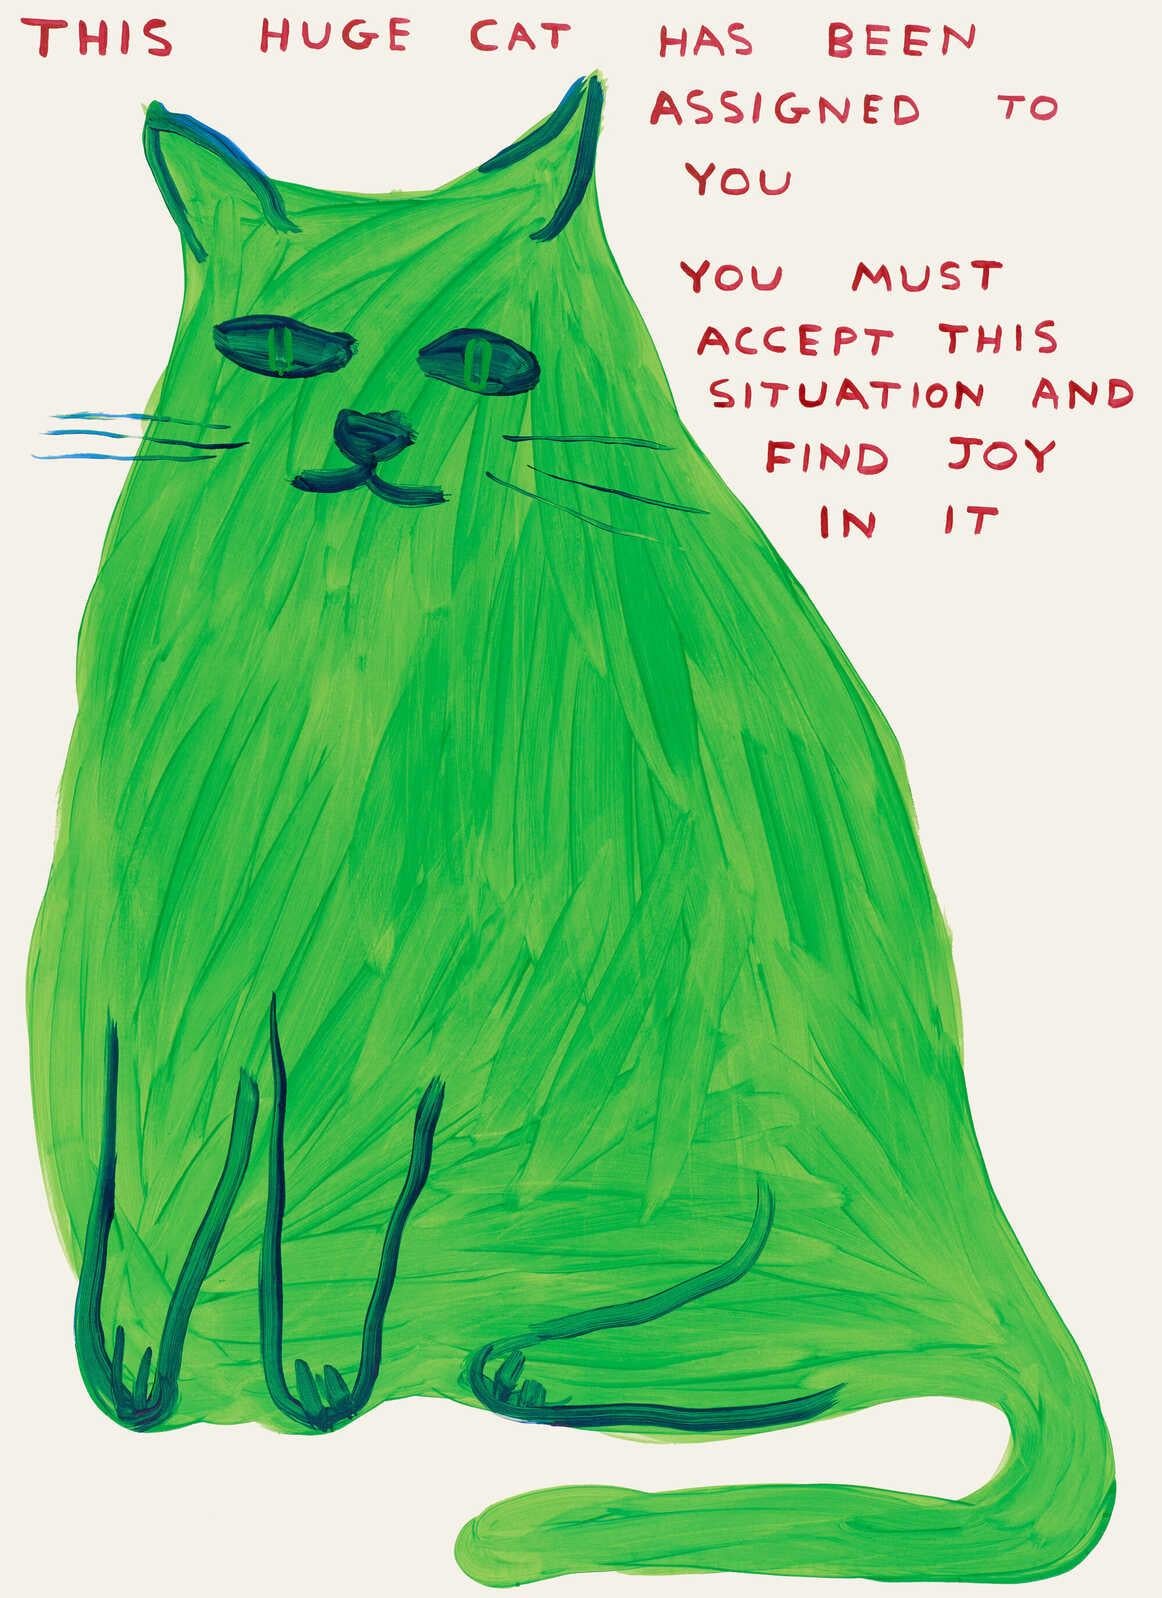 1 x David Shrigley, This Huge Cat, 2023
1 x David Shrigley, Life is Very Good
1 x David Shrigley, Some Of My Best Friends Are Pigs
1 x David Shrigley, Sorry For Being Annoying

This listing is for 4 David Shirgley Lithograph 

Offset lithograph on